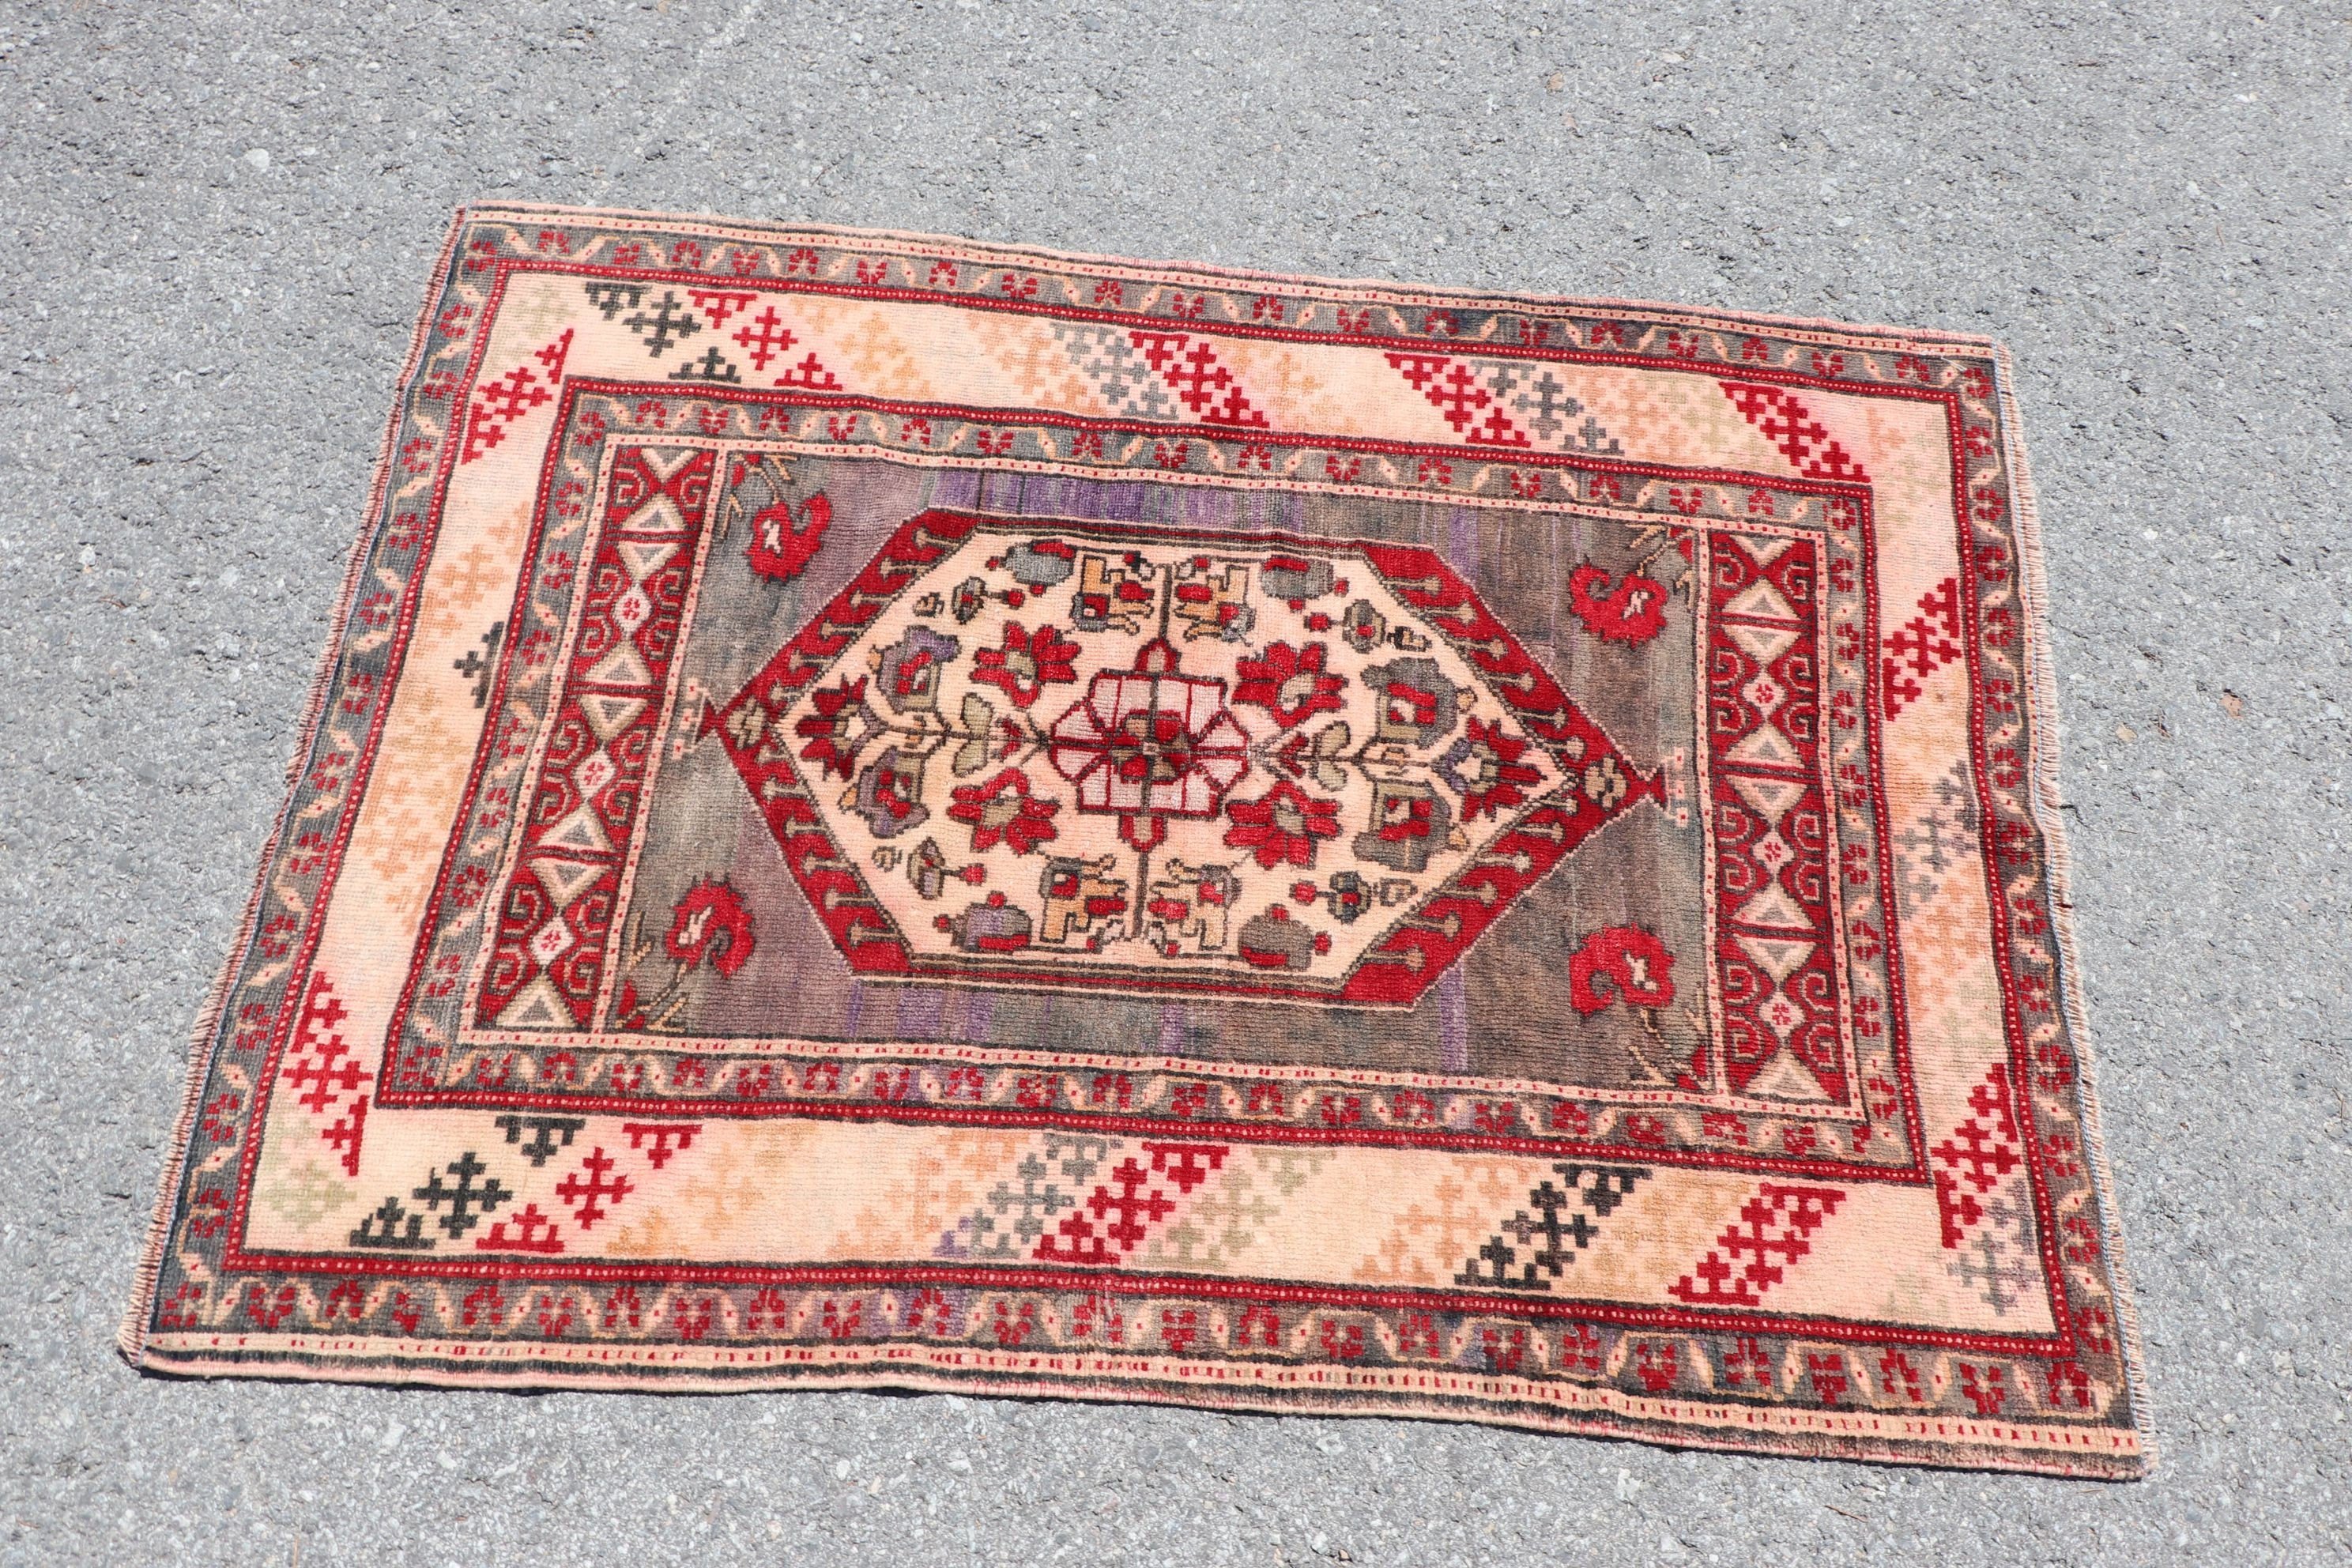 Car Mat Rug, 3x4 ft Small Rug, Red Antique Rug, Turkish Rug, Rugs for Kitchen, Wall Hanging Rug, Home Decor Rug, Antique Rugs, Vintage Rug